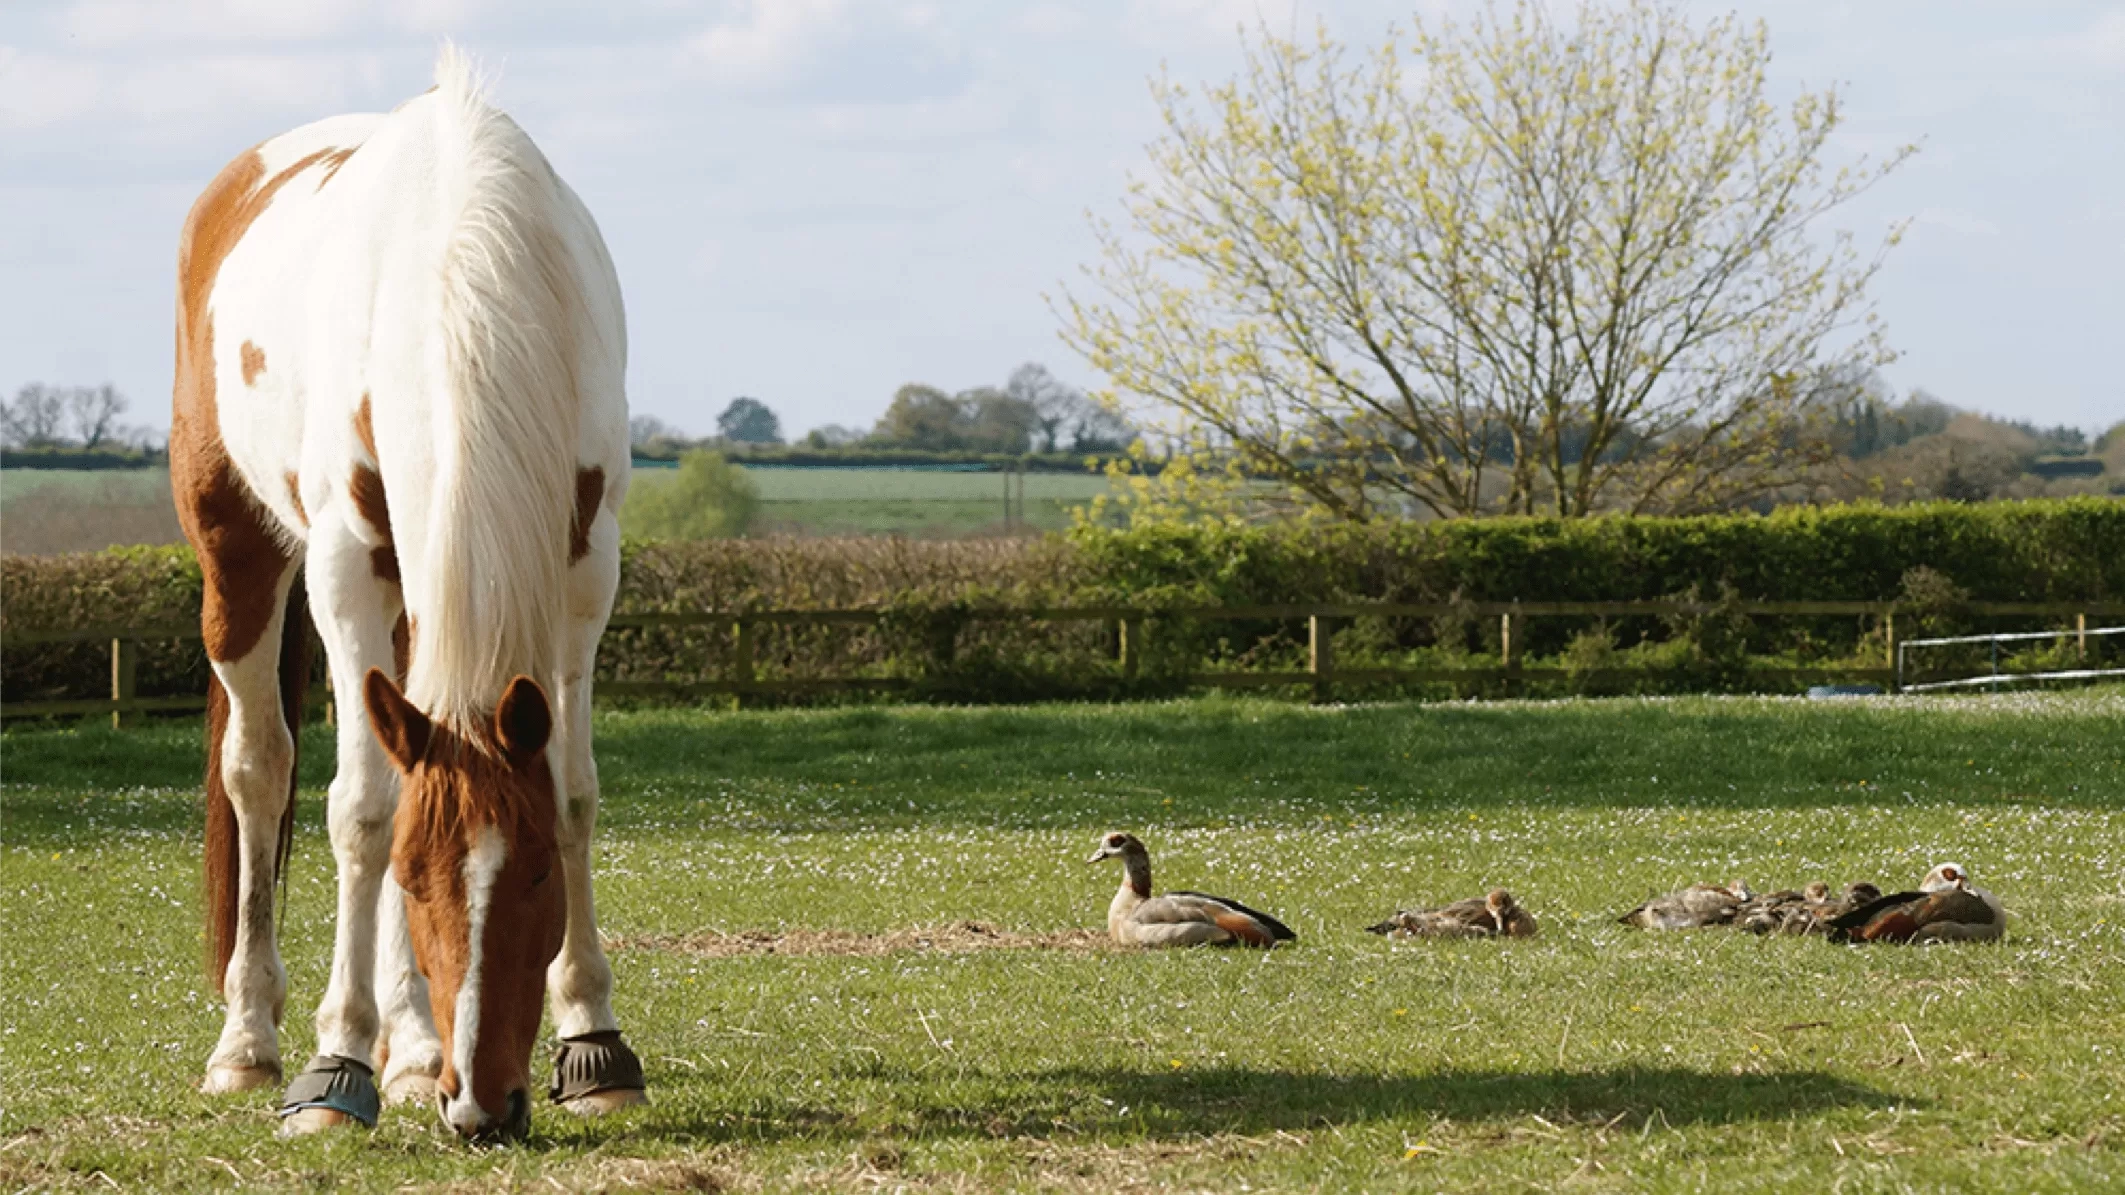 Horse with ducks in a field